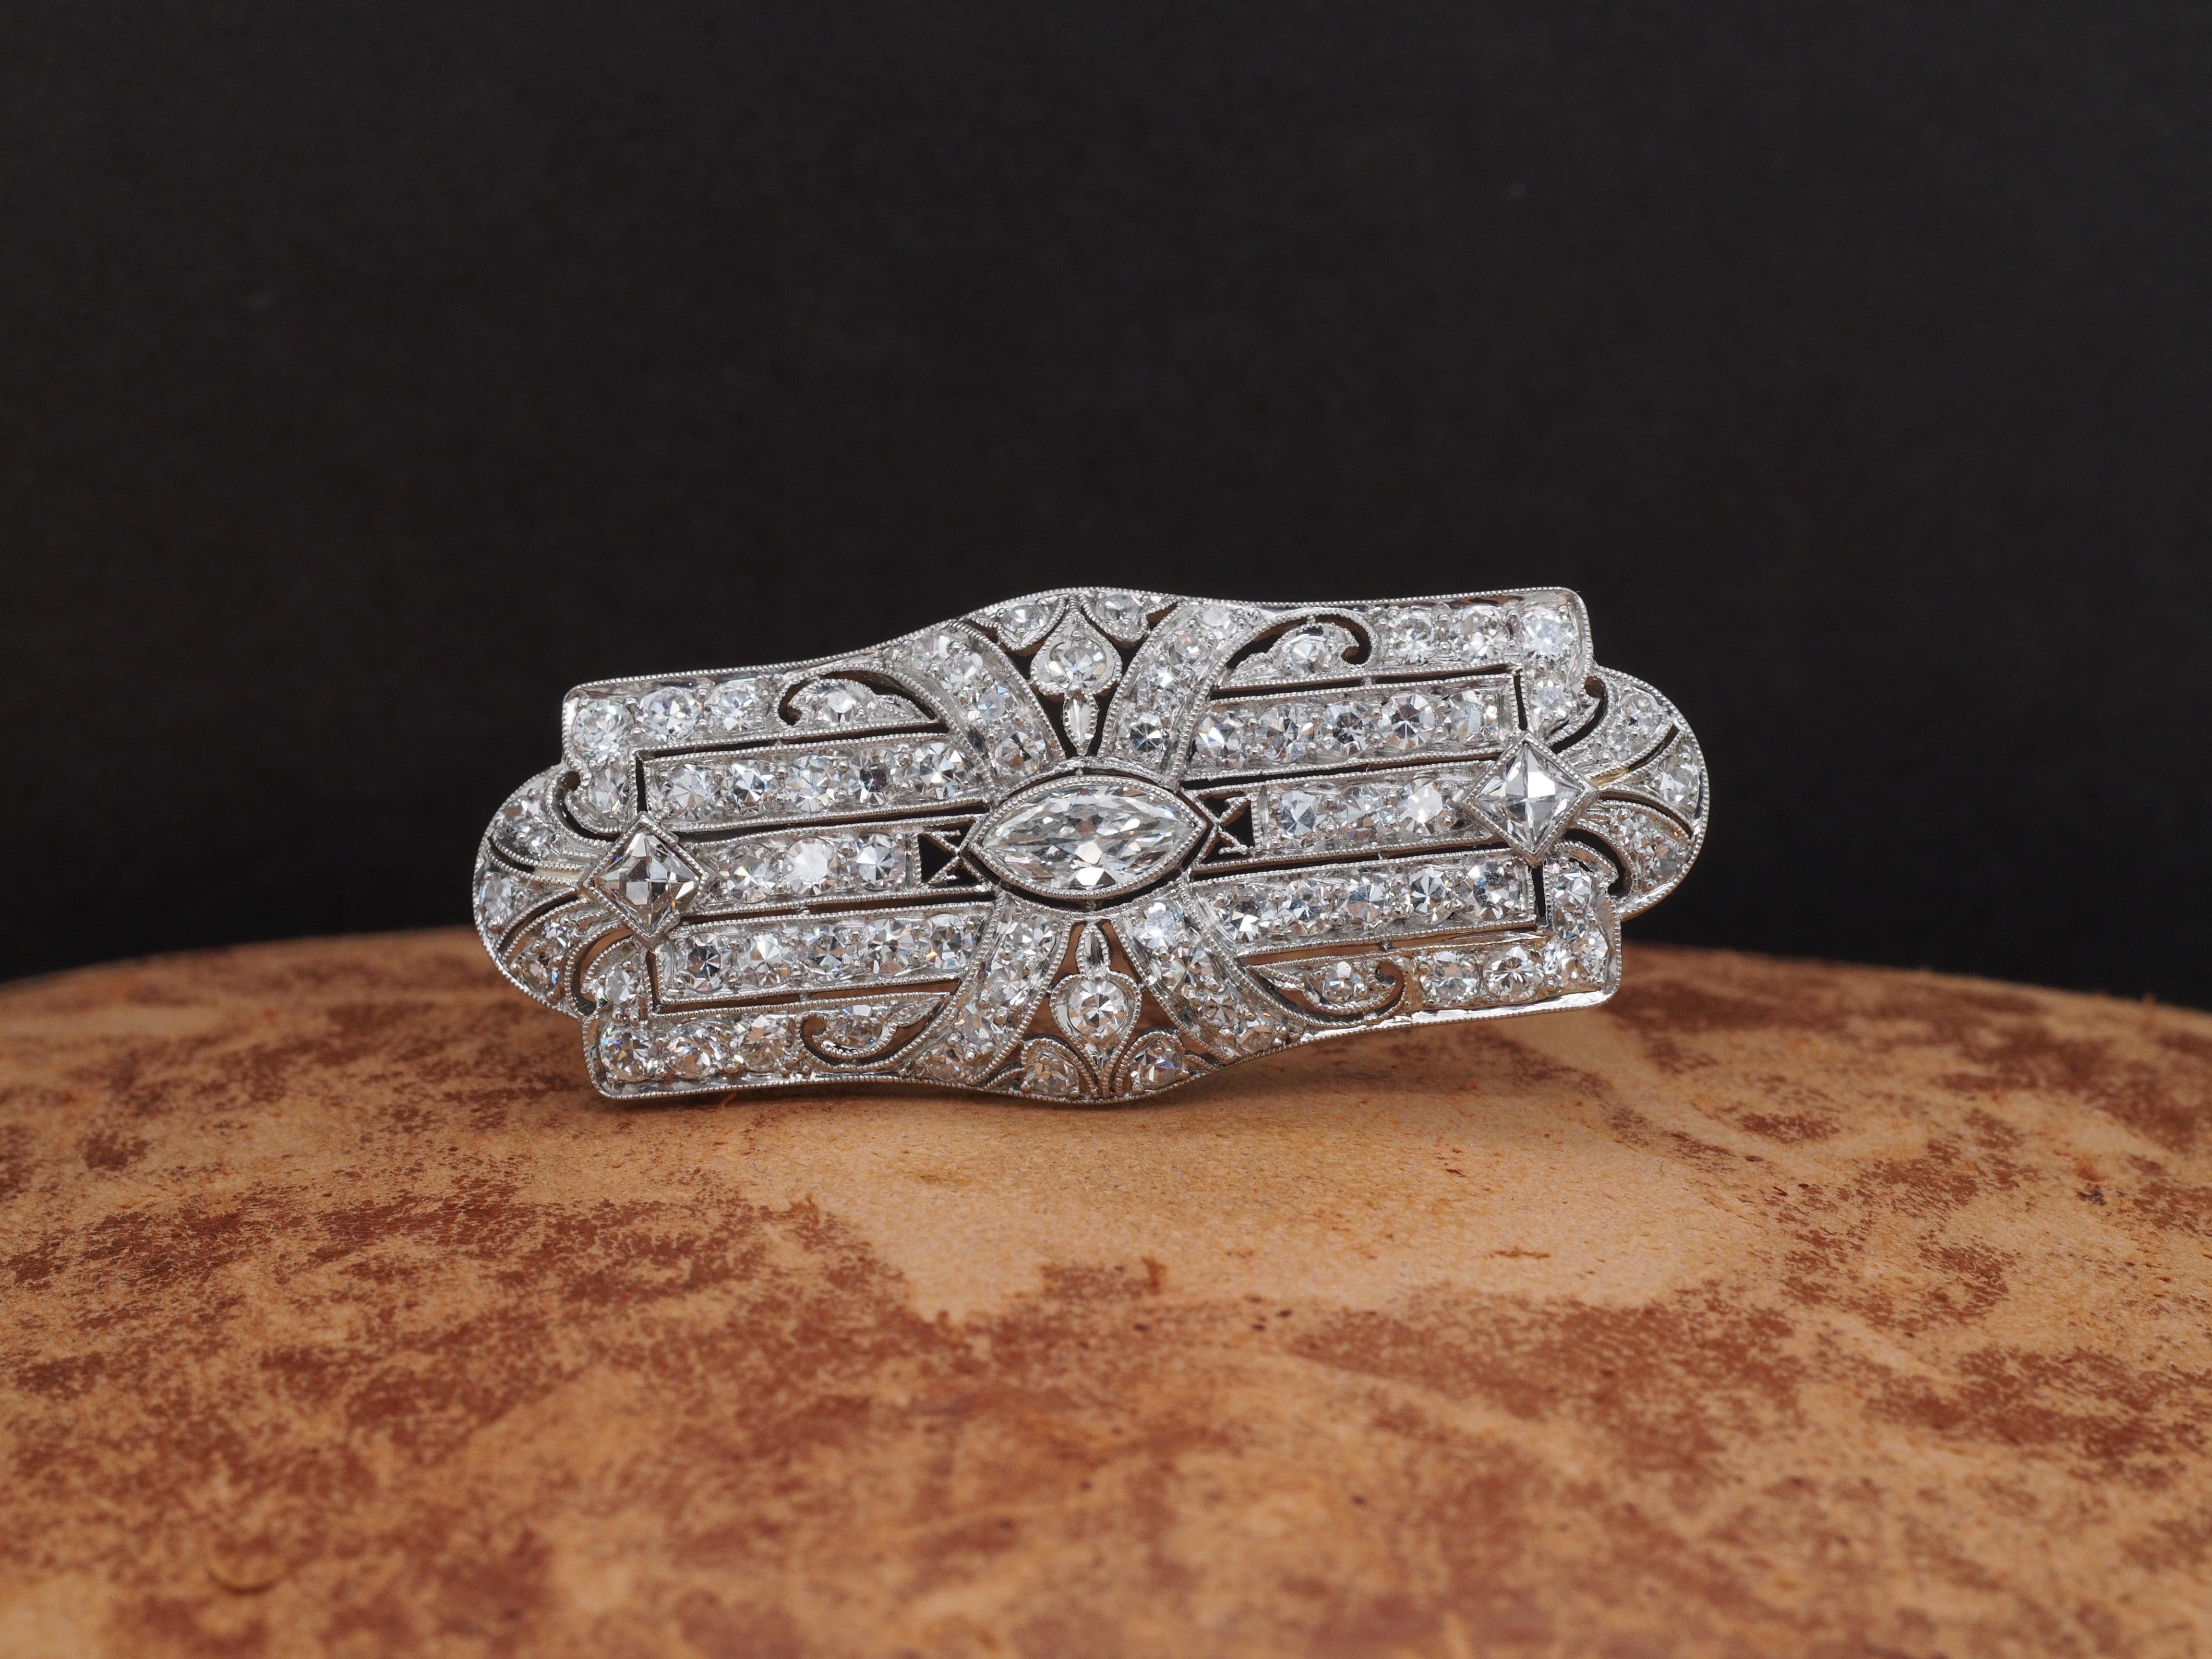 Item Details:
Metal Type: Platinum [Hallmarked, and Tested]
Weight: 7.3grams
Diamonds Details:
Total Diamond Weight: 2.50ct, total weight
Center Diamond: Antique Marquise, .50ct, G-H Color, VS Clarity, Natural
Side Diamonds: 2.00ct, total weight.